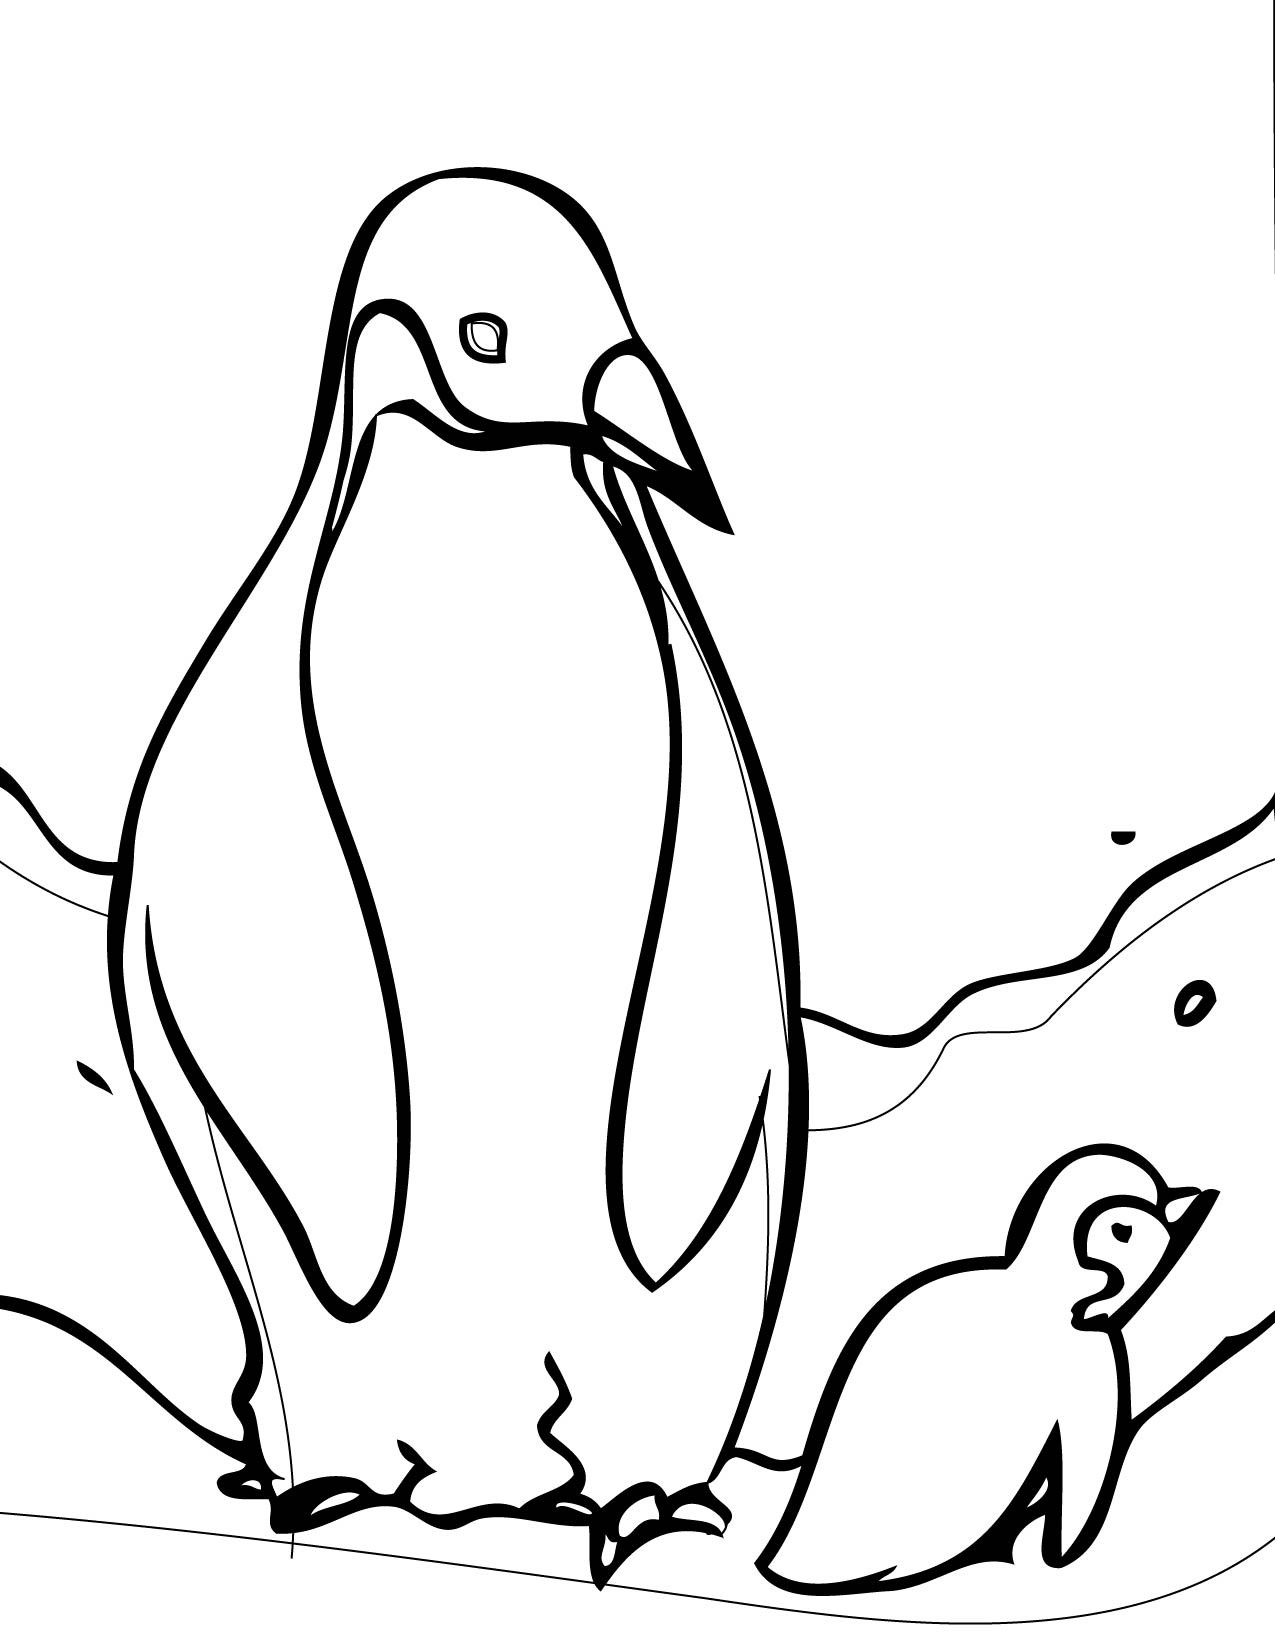 penguin-coloring-page-coloring-print